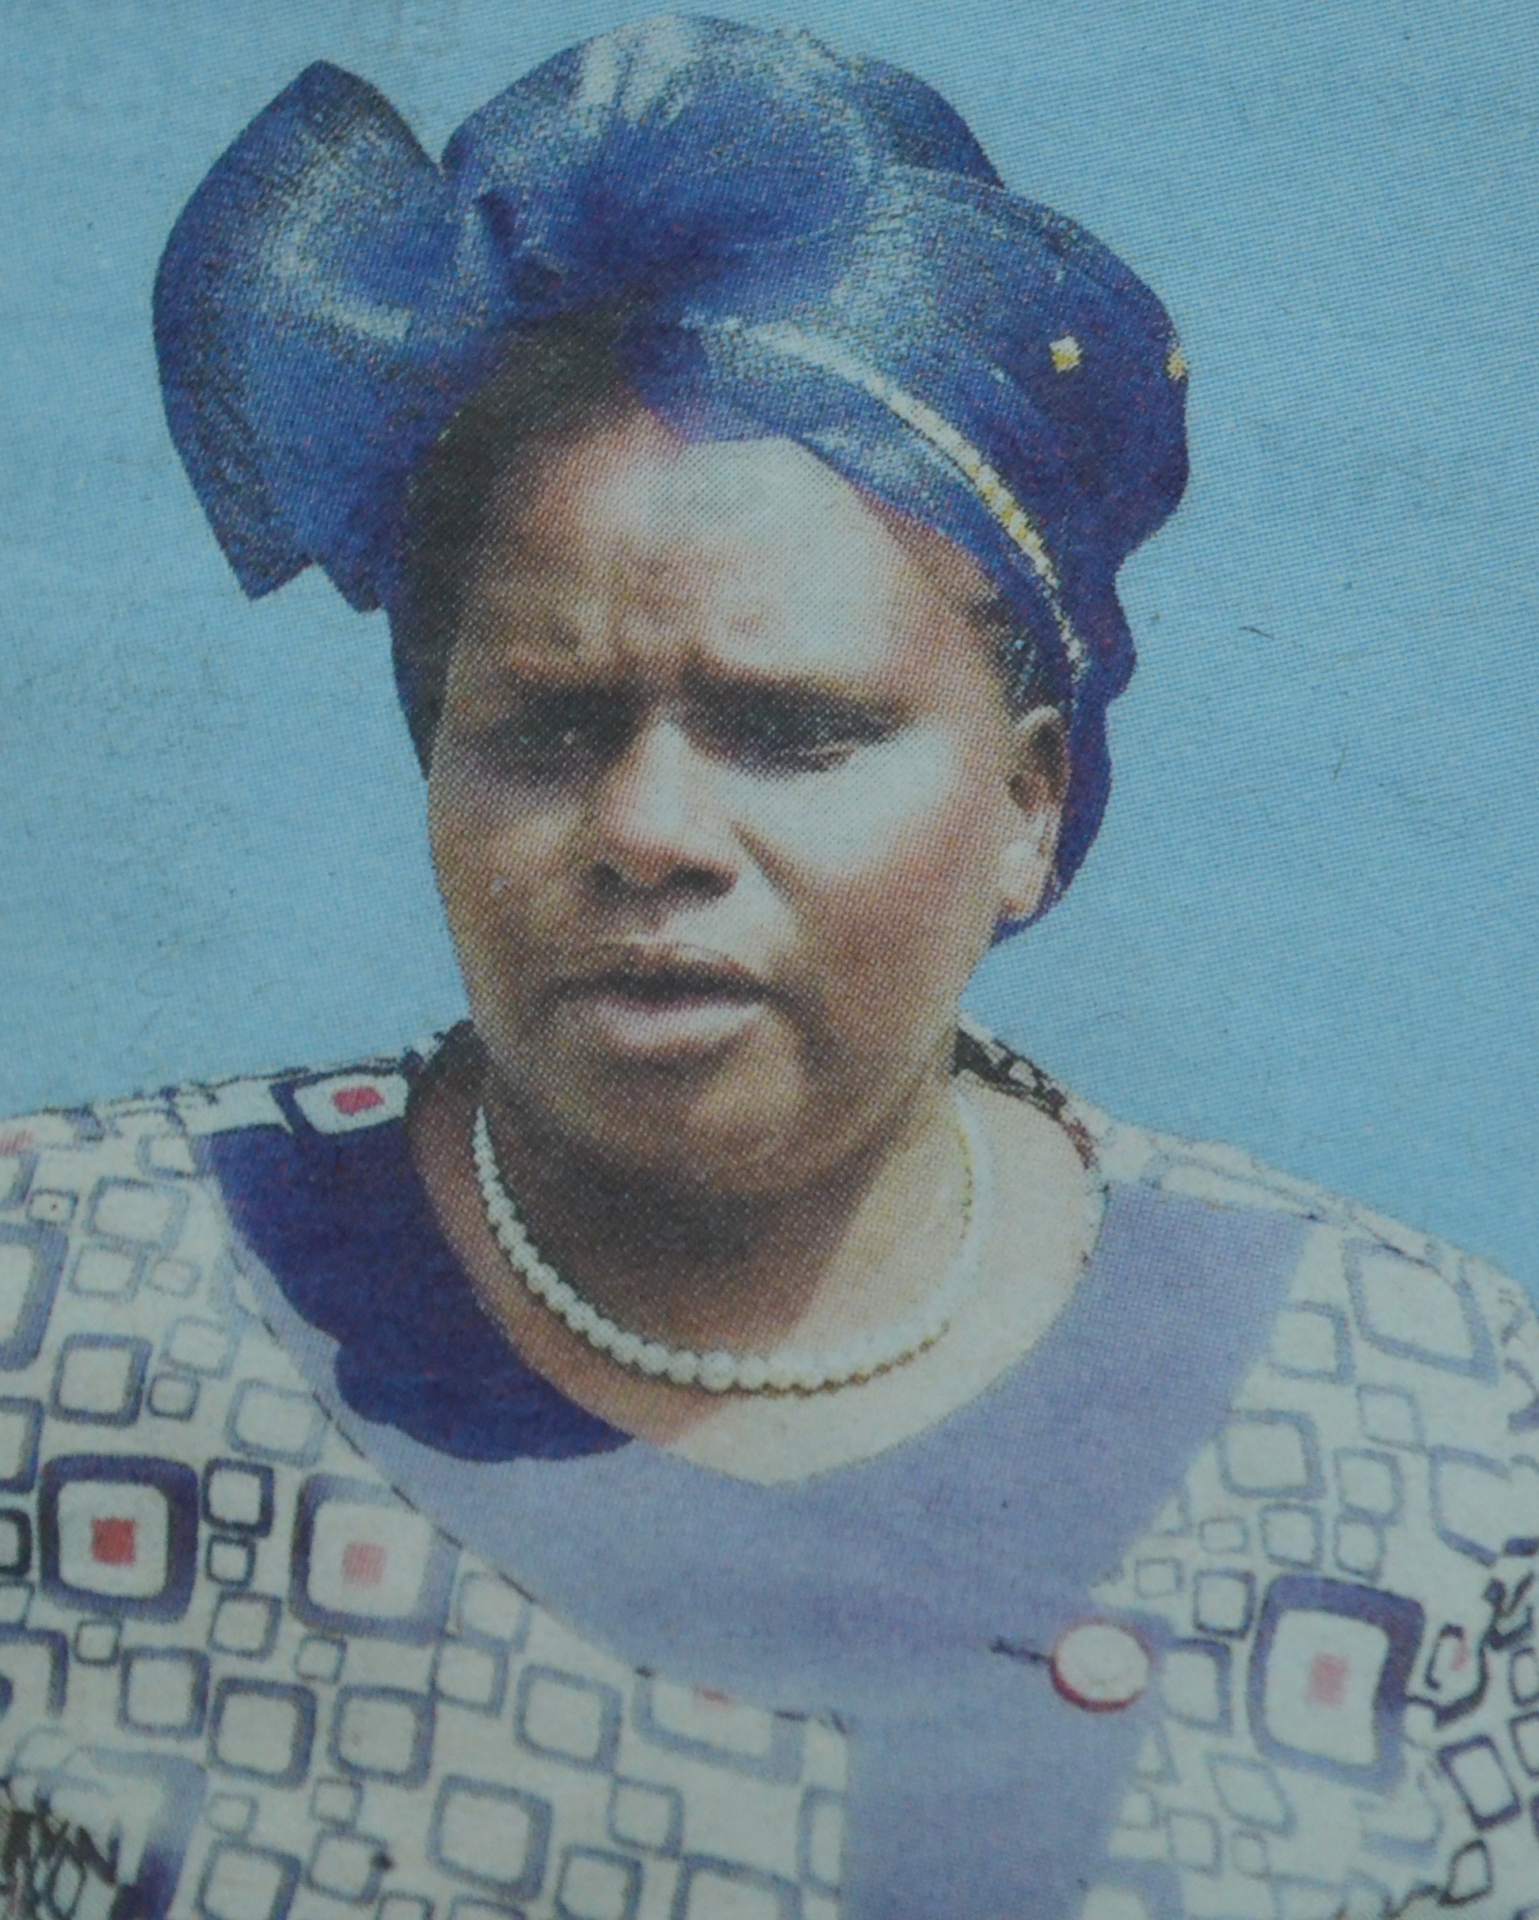 Obituary Image of Mary Chepng’etich Koskei